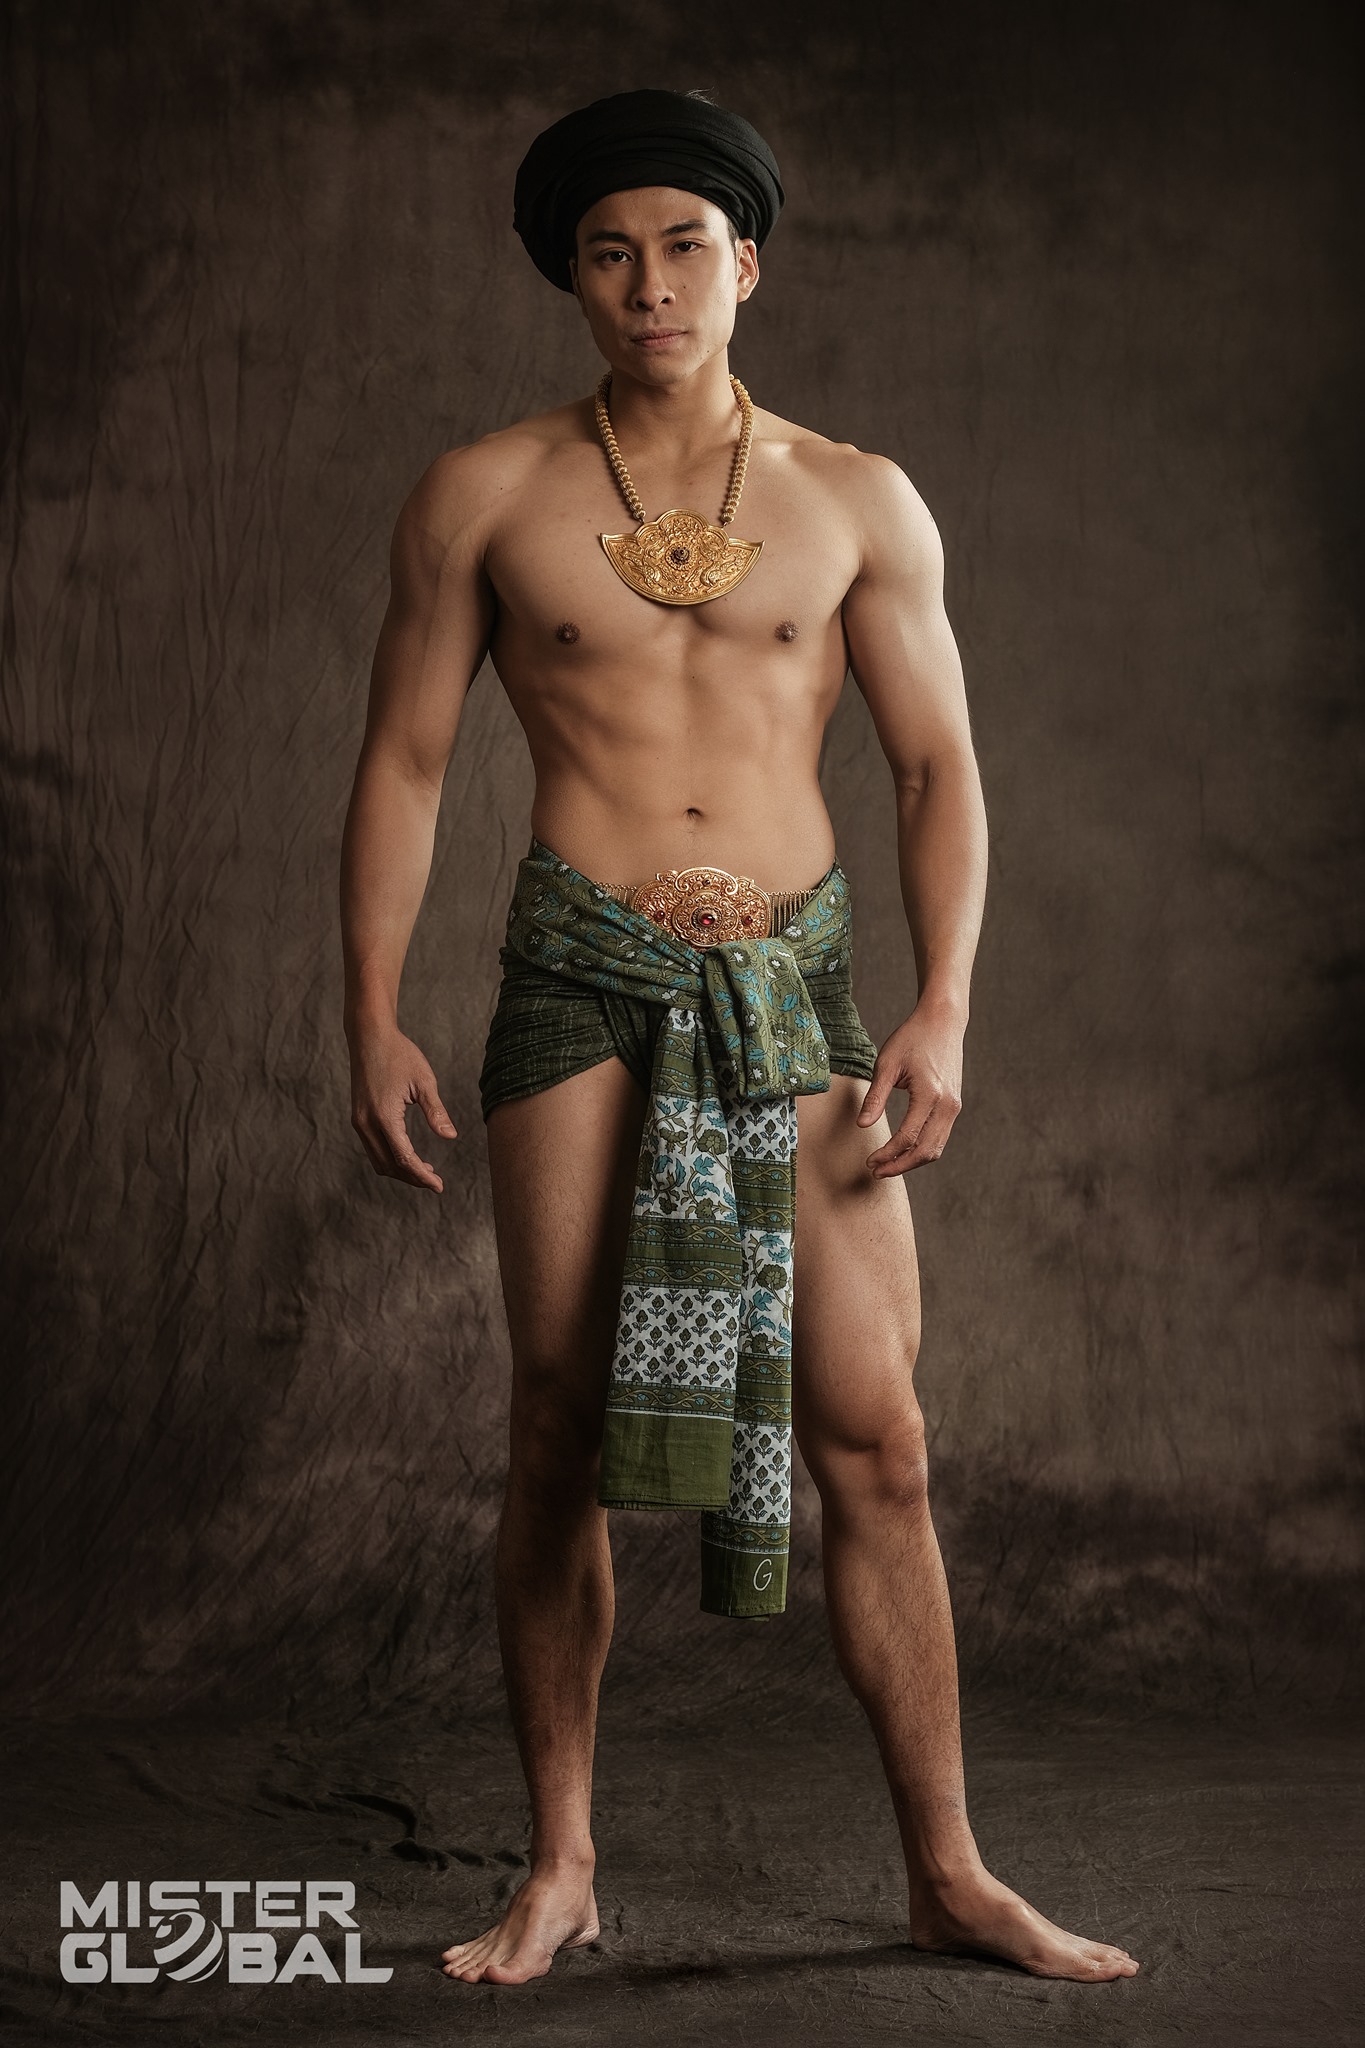 ☣️ Mister Global 2019 ⚛️ IN THAI COSTUMES ☣️ 31143